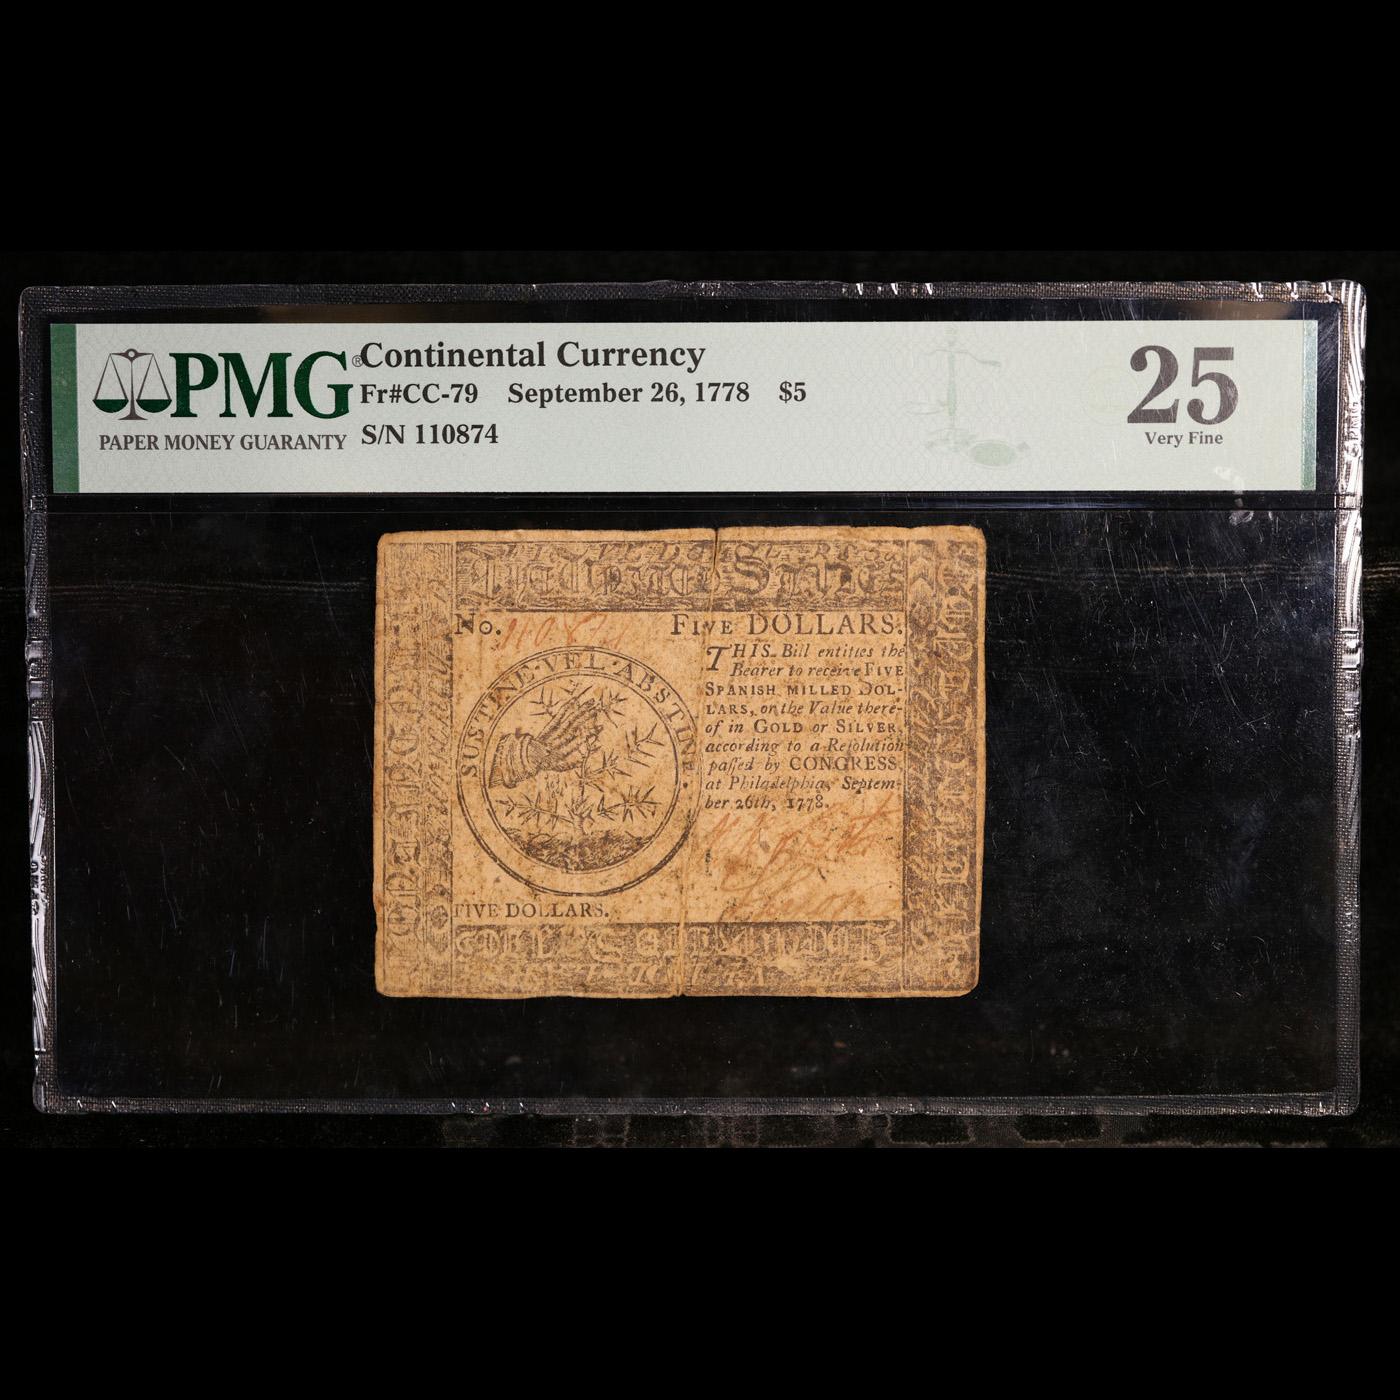 Continental Currency September 26th, 1778 $5 Fr-CC79 Graded vf25 By PMG